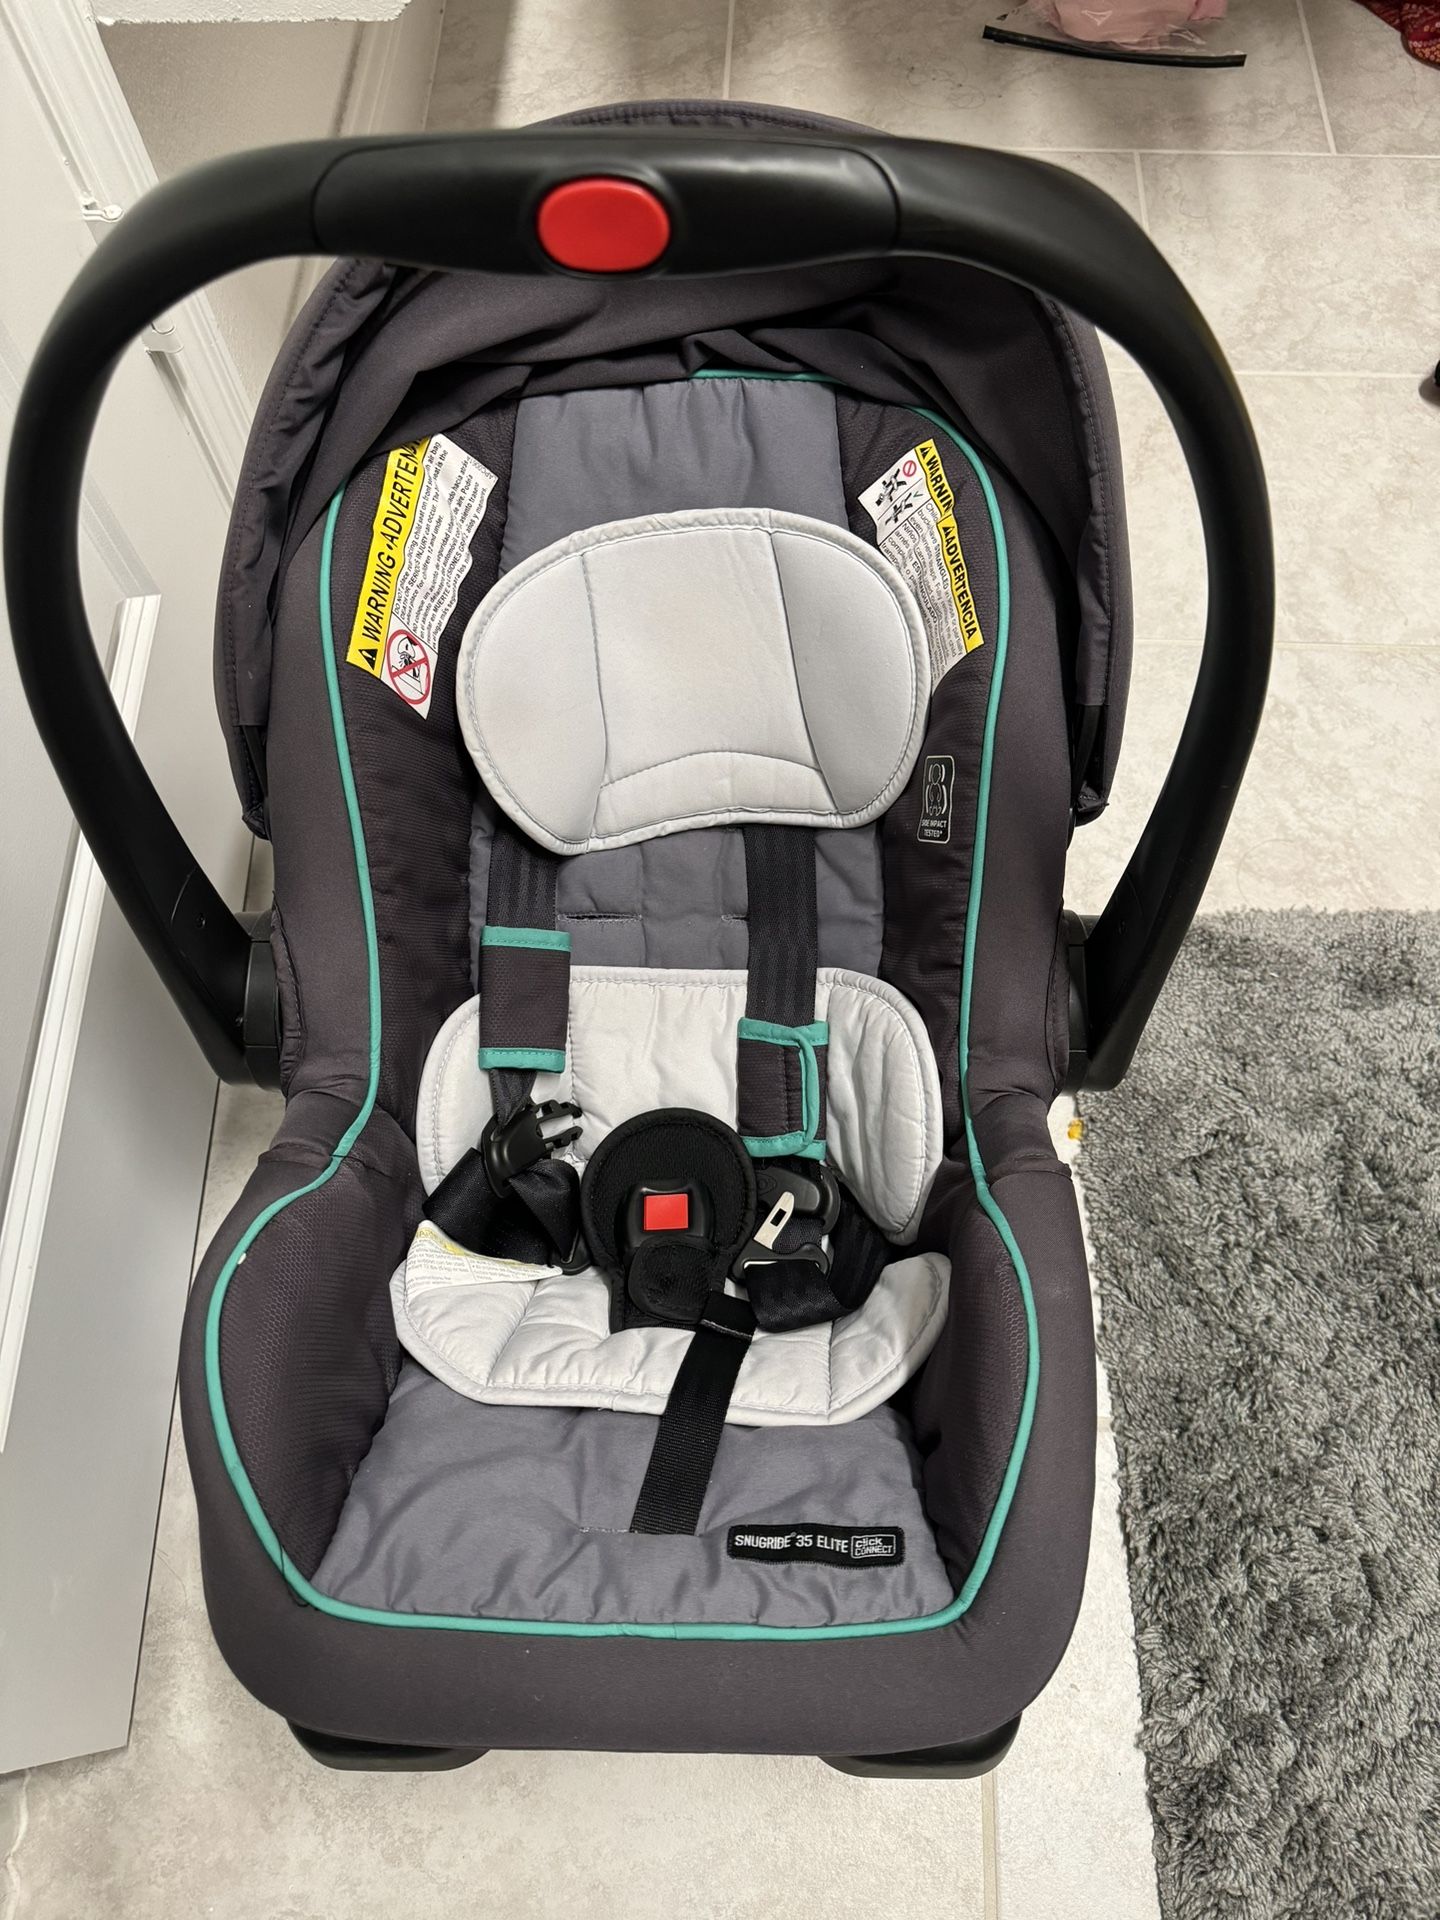 Graco 35 DLX Infant Carrier & Car Seat With Stroller